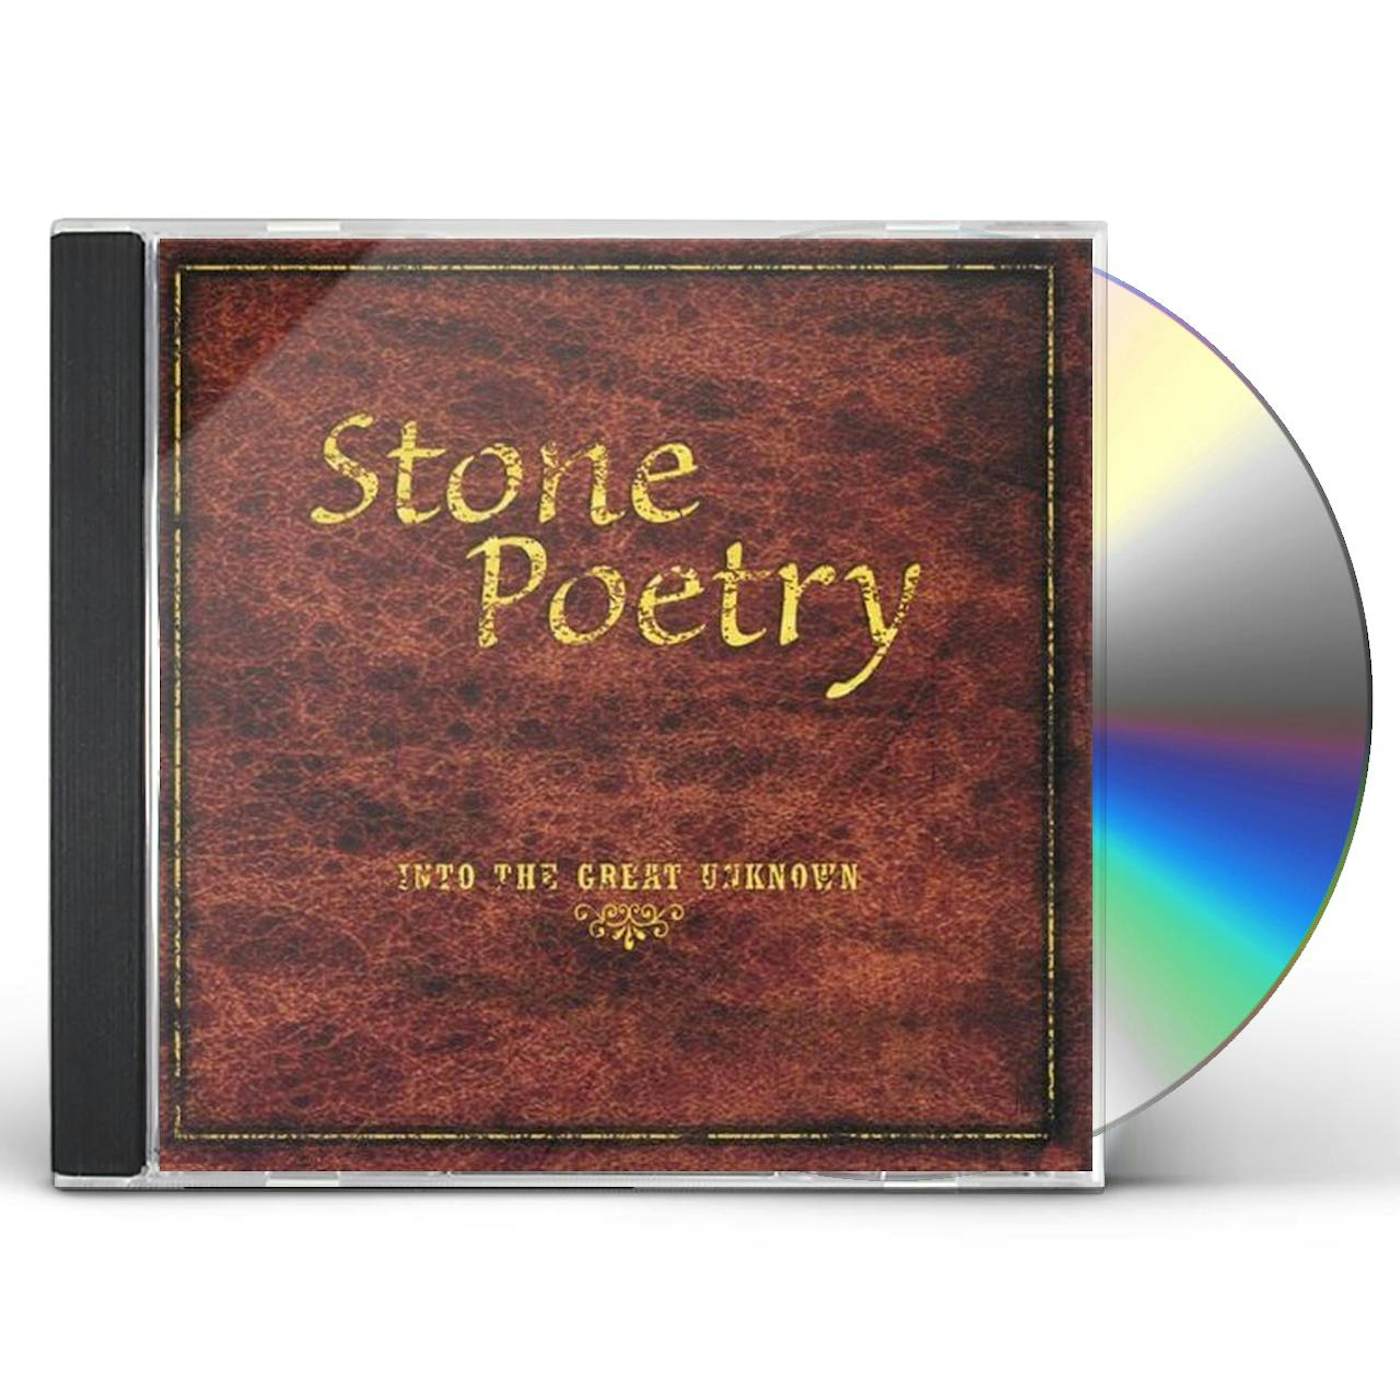 Stone Poetry INTO THE GREAT UNKNOWN CD